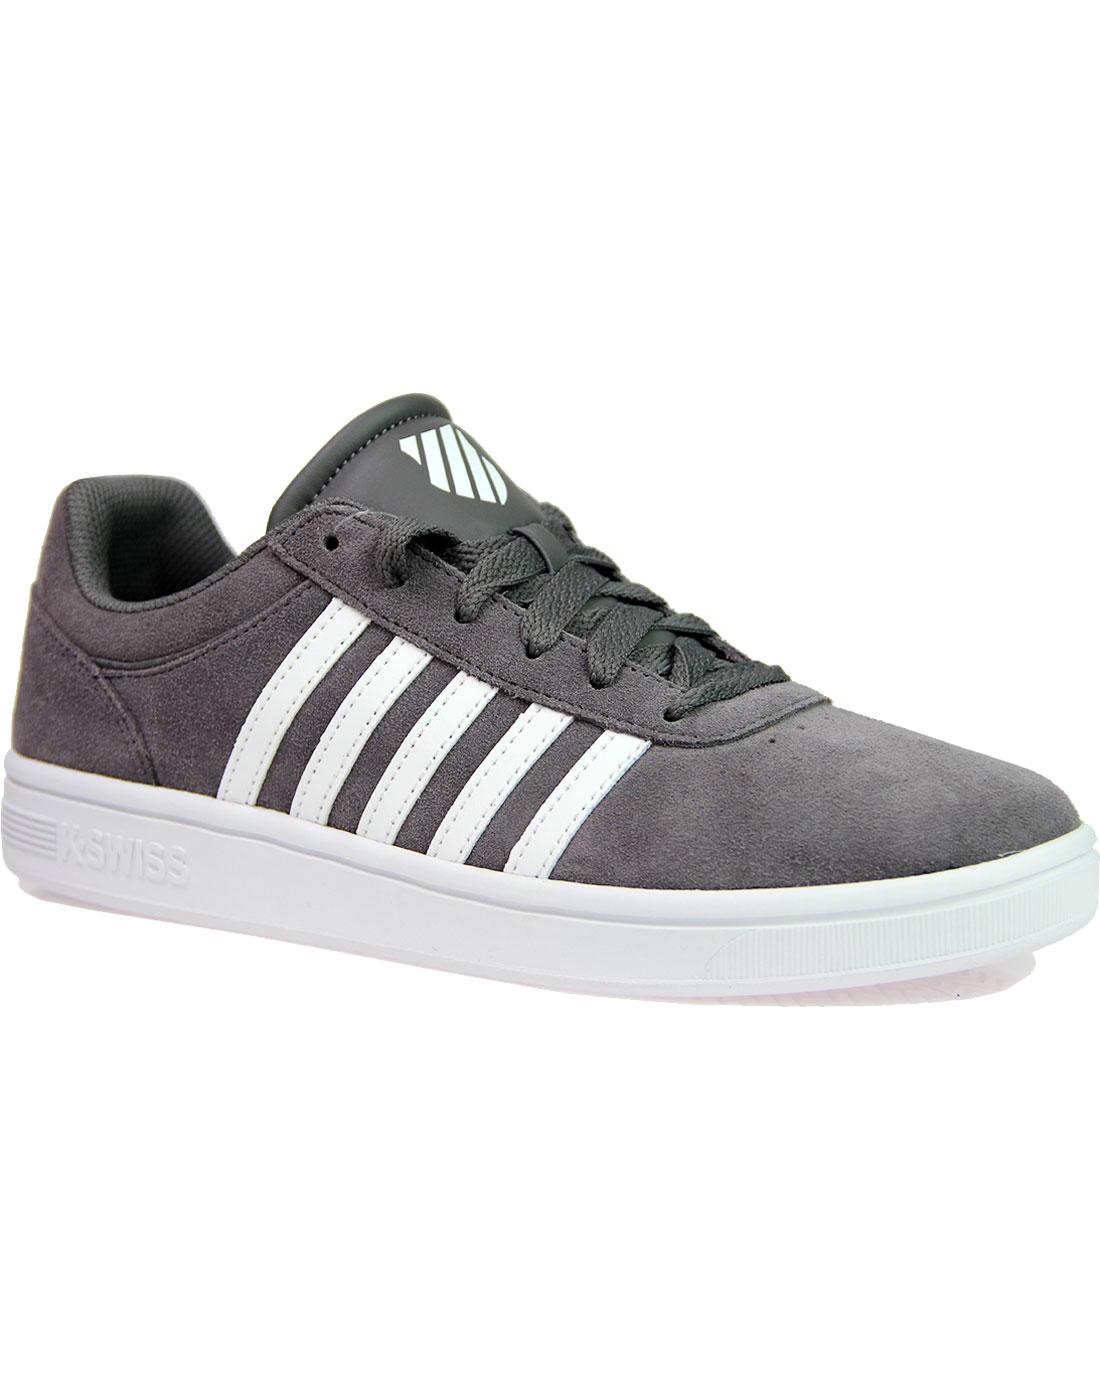 K-SWISS 'Court Cheswick' Suede Tennis Trainers in Grey